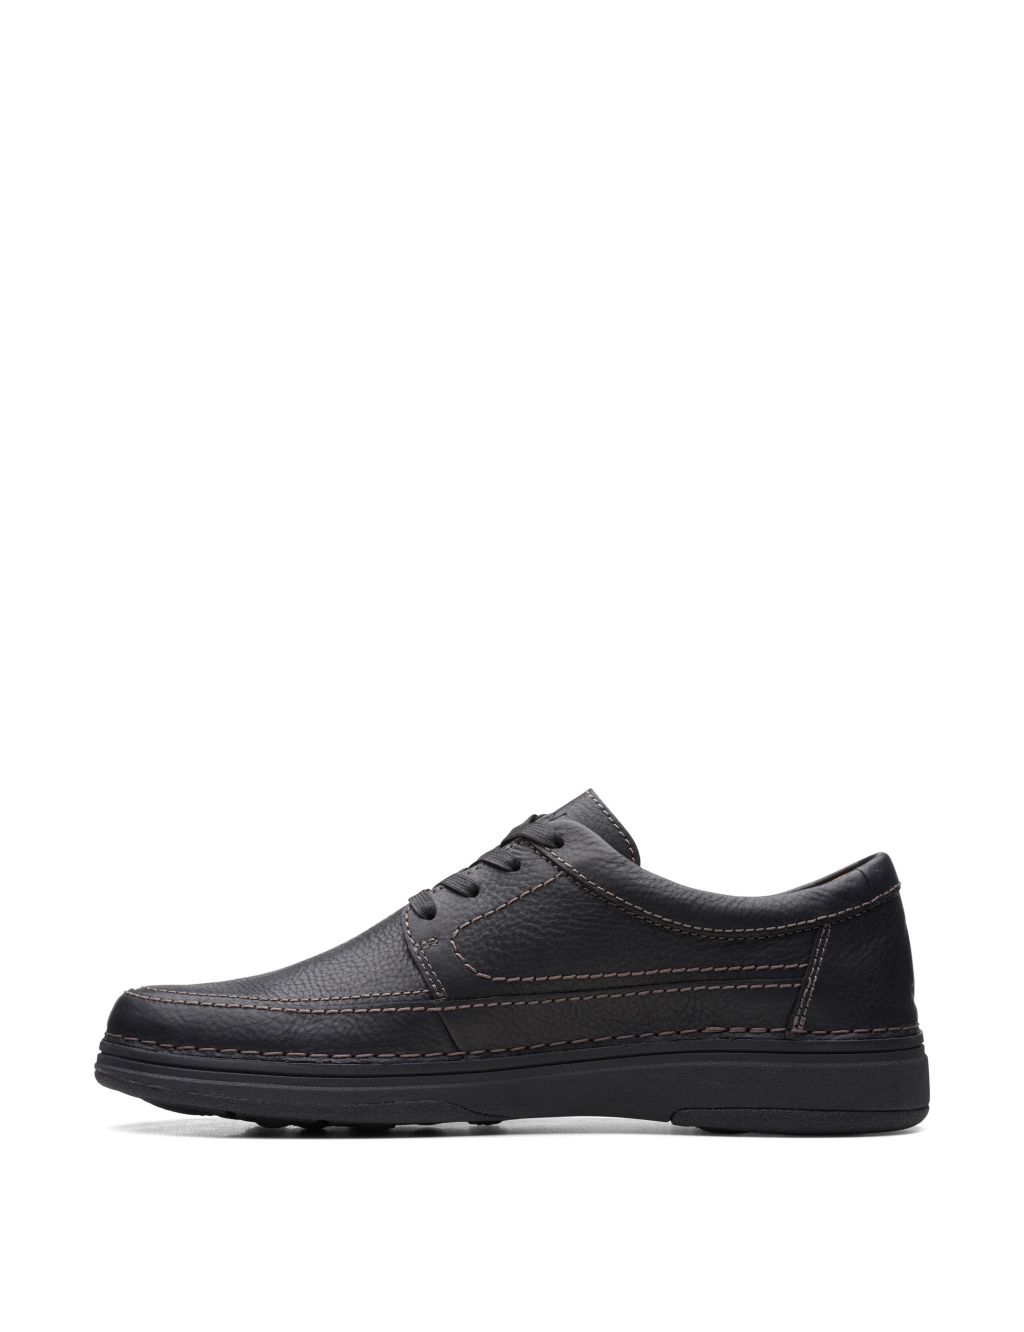 Leather Casual Shoes image 6